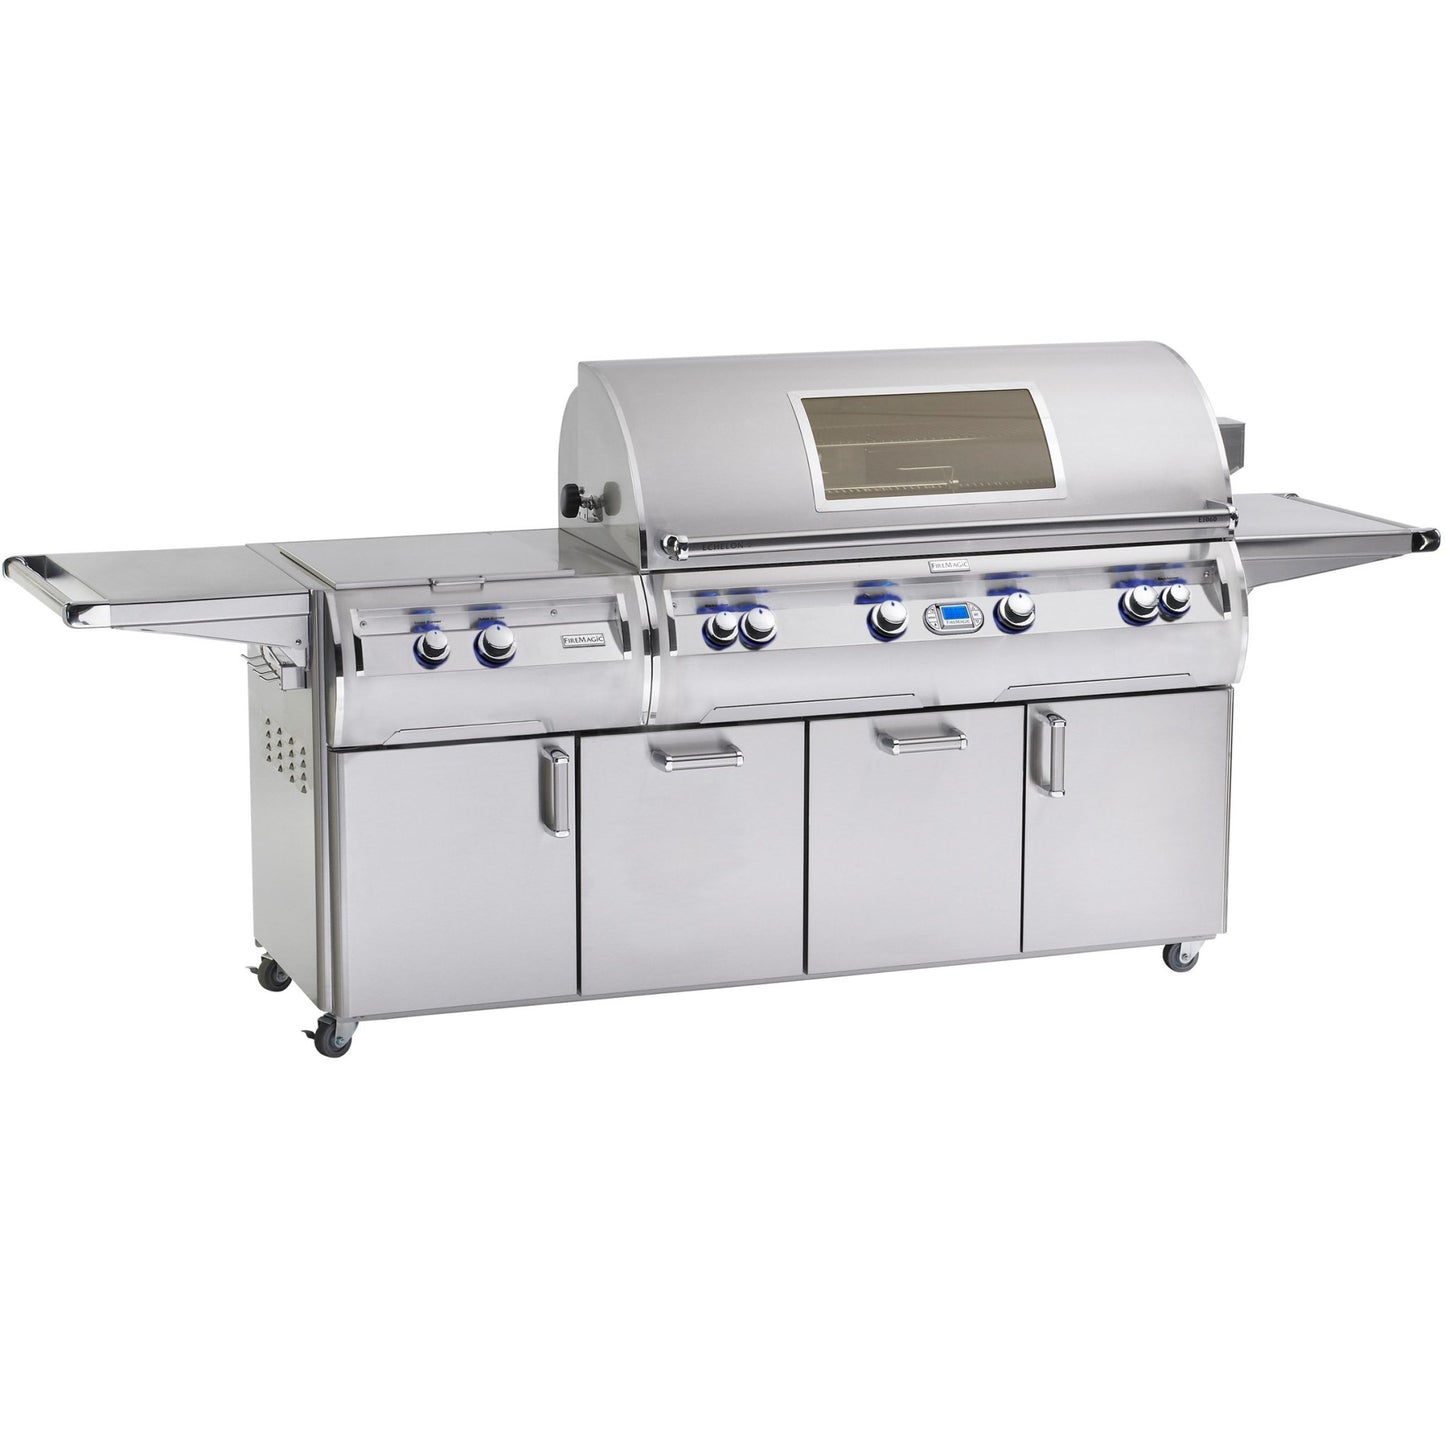 Fire Magic Echelon 48-Inch Portable Gas Grill, W/ Rotisserie, Cabinet and Power Burner - grillsNmore.com